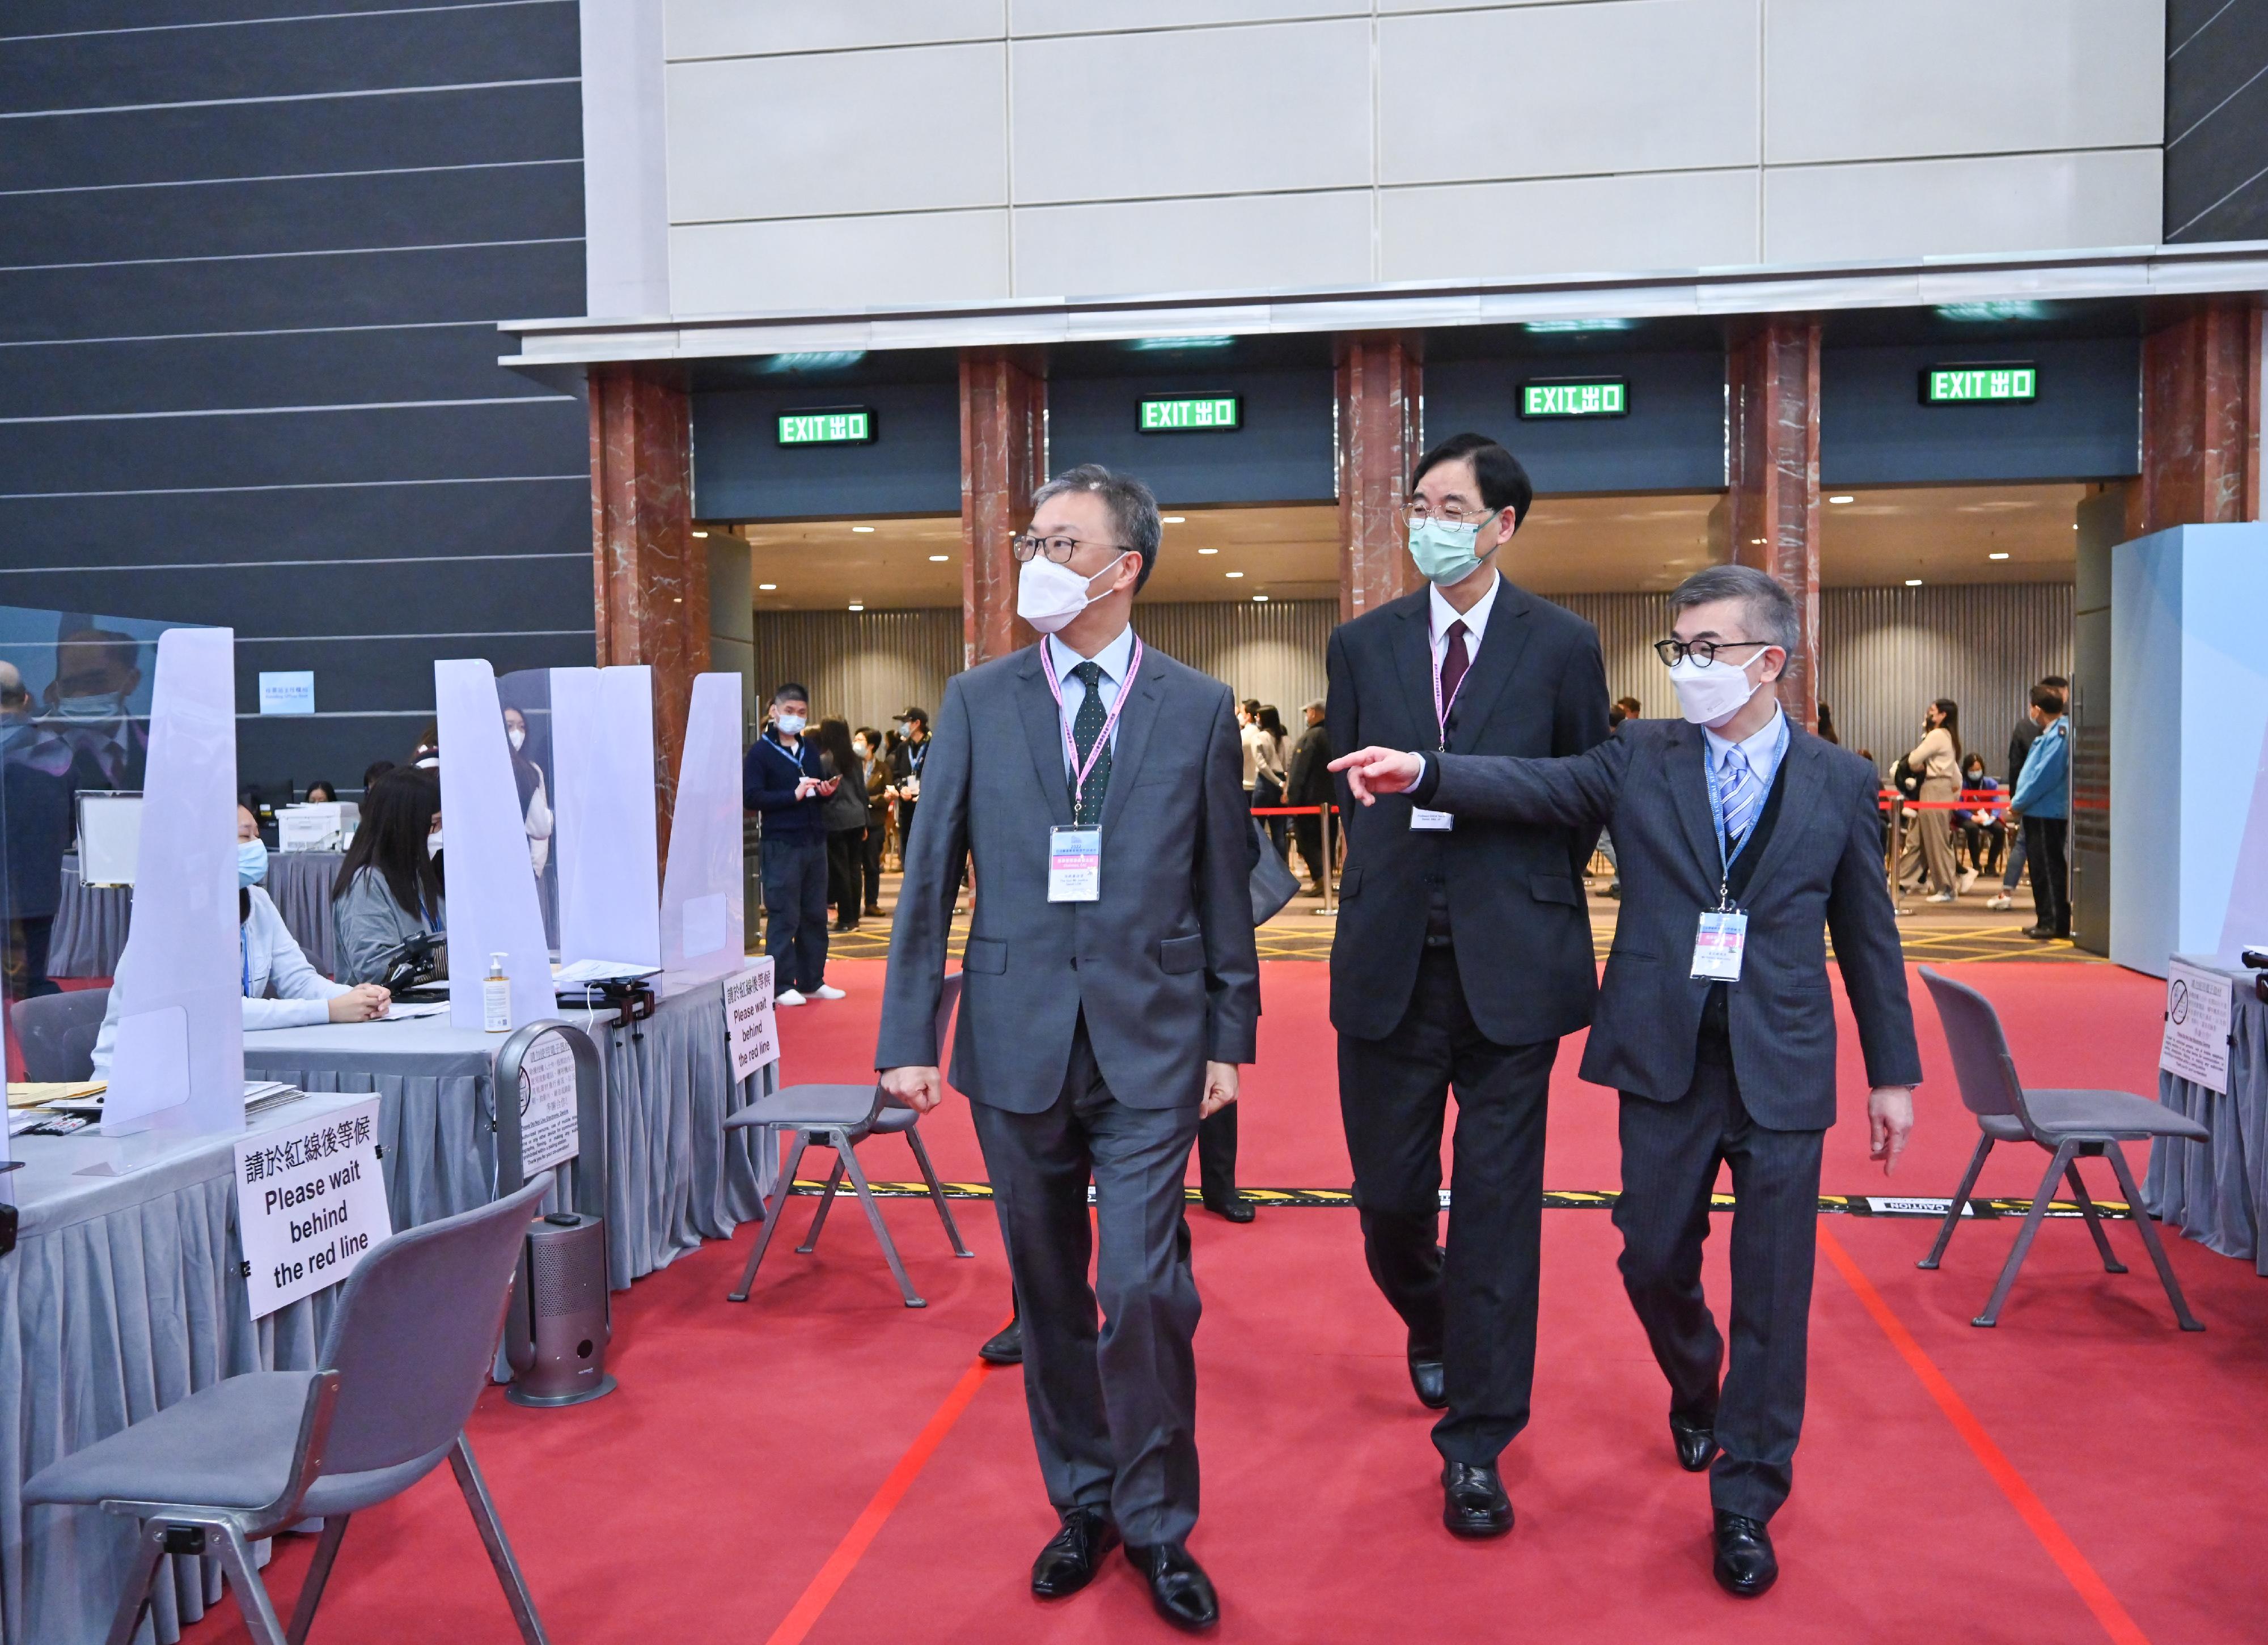 The Chairman of the Electoral Affairs Commission (EAC), Mr Justice David Lok (left) and EAC member Professor Daniel Shek (centre) were briefed by the Chief Electoral Officer of the Registration and Electoral Office, Mr Raymond Wang (right) during their visit to the polling station of the 2022 Legislative Council Election Committee constituency by-election at the Hong Kong Convention and Exhibition Centre today (December 17).